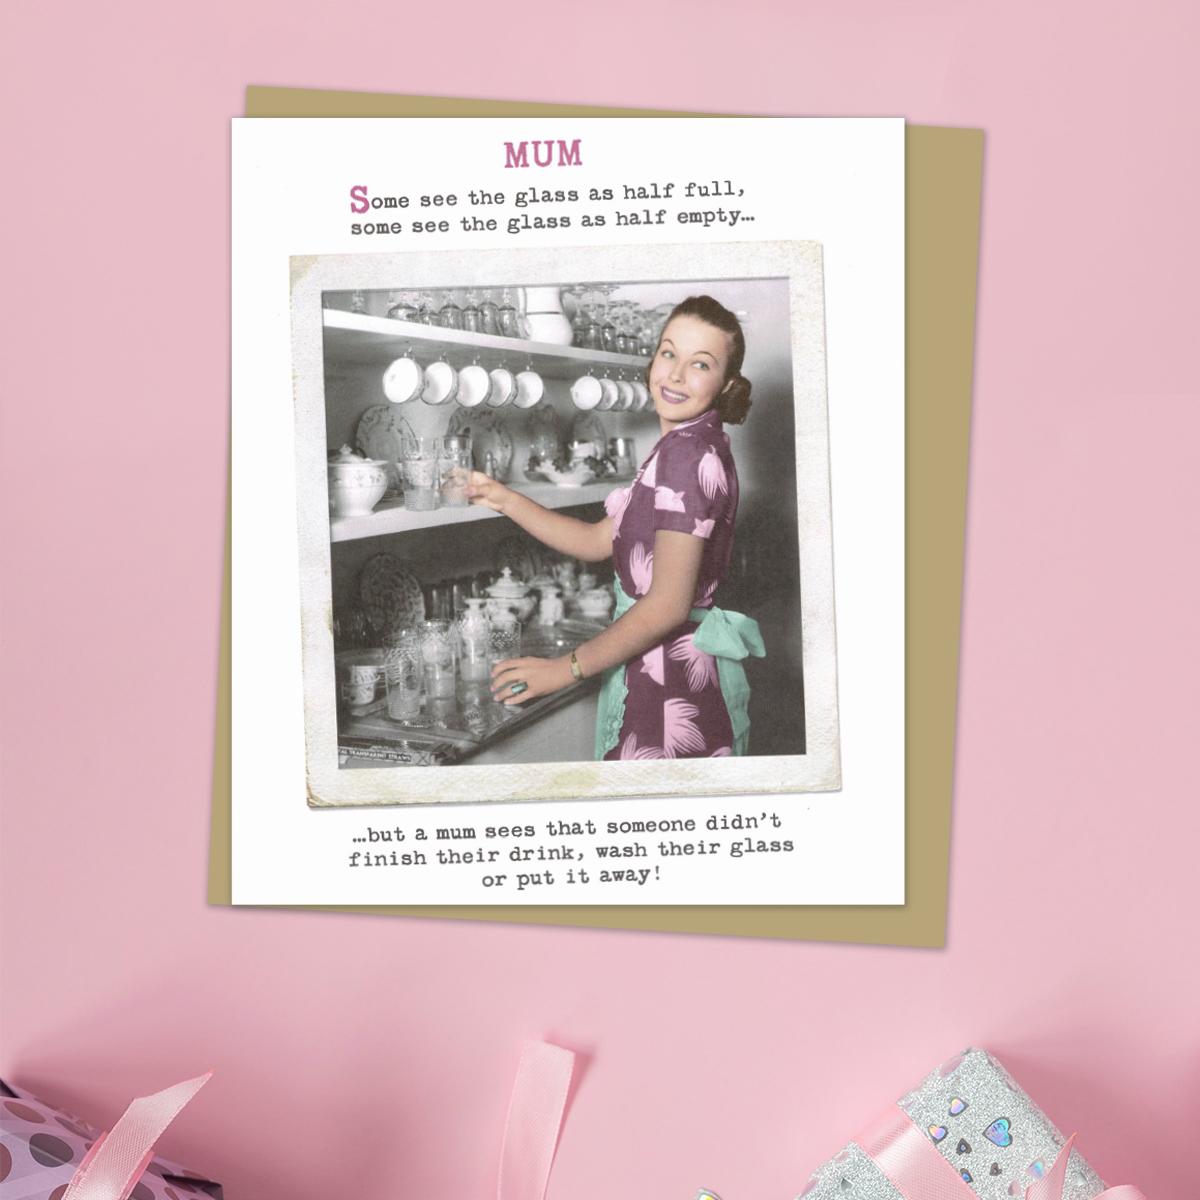 Mothers Day Card With Retro Photographic Image Of a Woman At An Old Fashioned Dresser. Caption: Some See The Glass As Half Full, Some See The Glass As Half Empty... But A Mum Sees That Someone Didn't Finish Their Drink, Wash Their Glass Or Put It Away Again! Complete With Manila Envelope